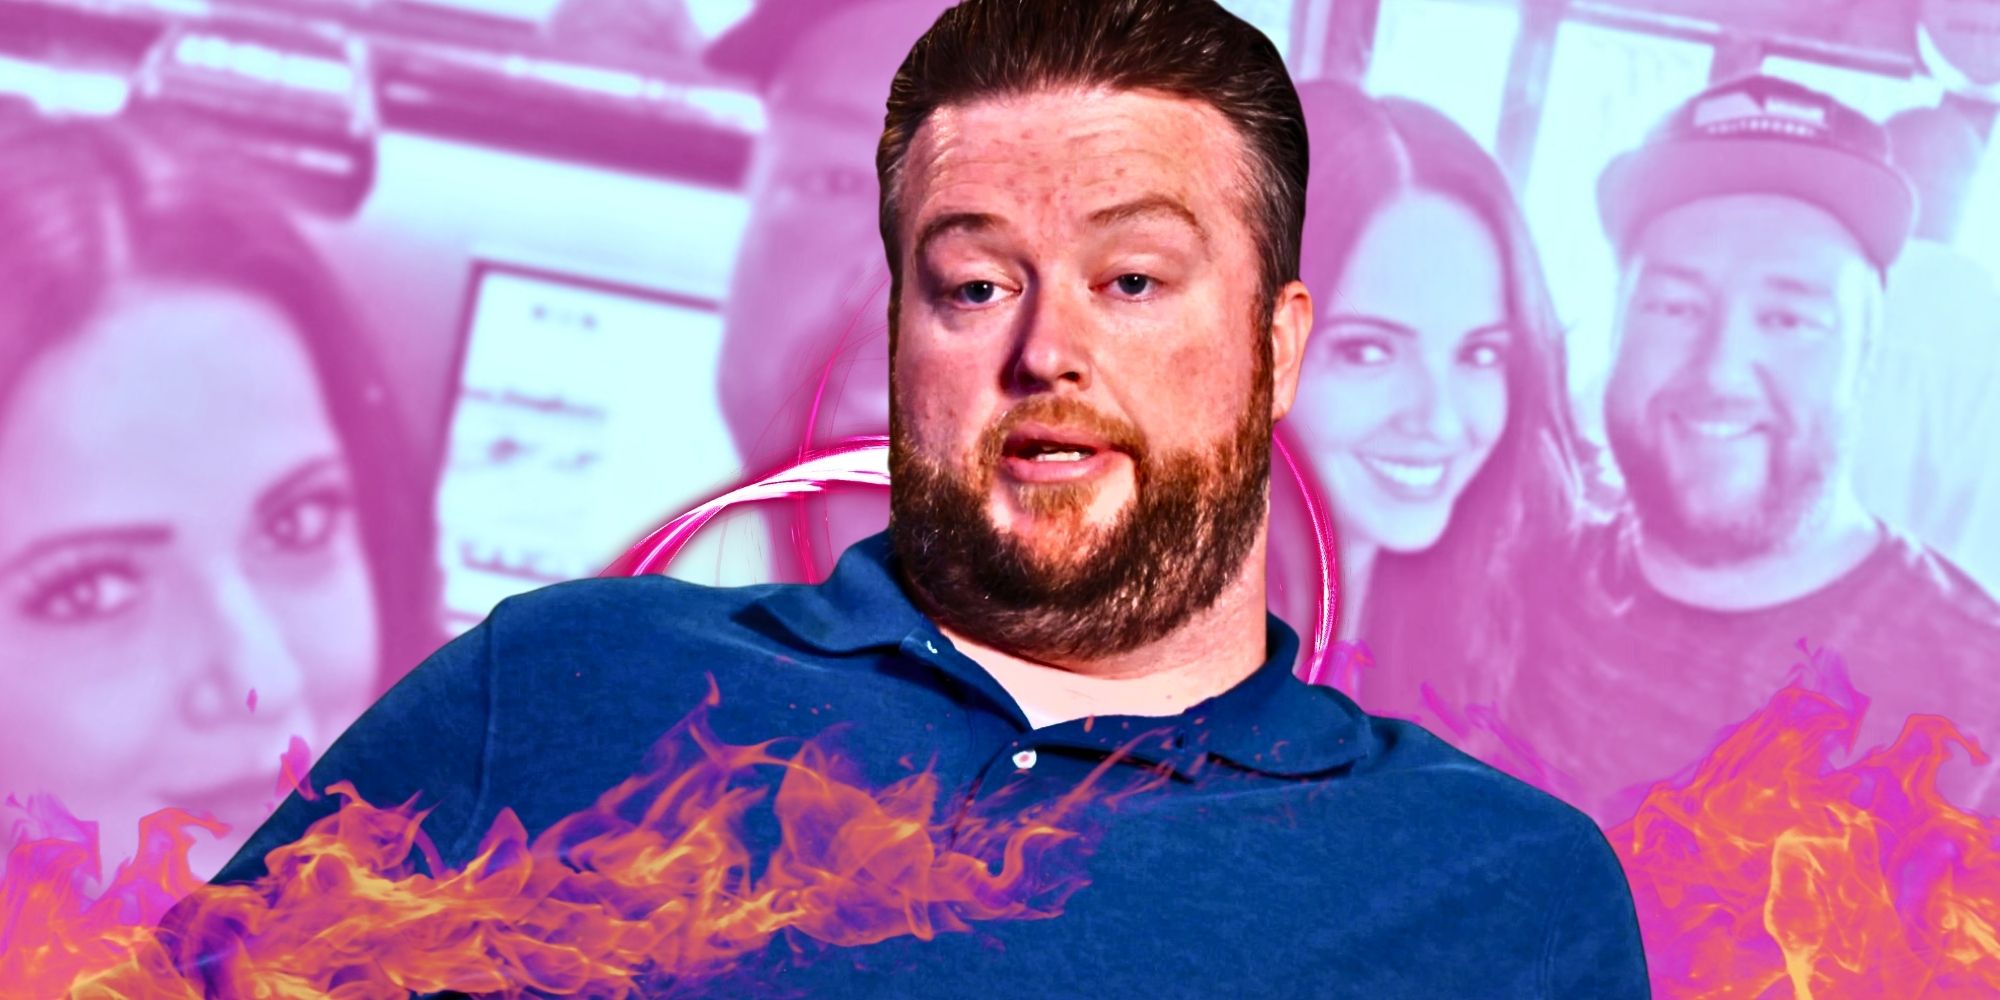 Mike Youngquist wearing blue shirt and photos with Marcia Alves in the 90 Day Fiance star's background with flames